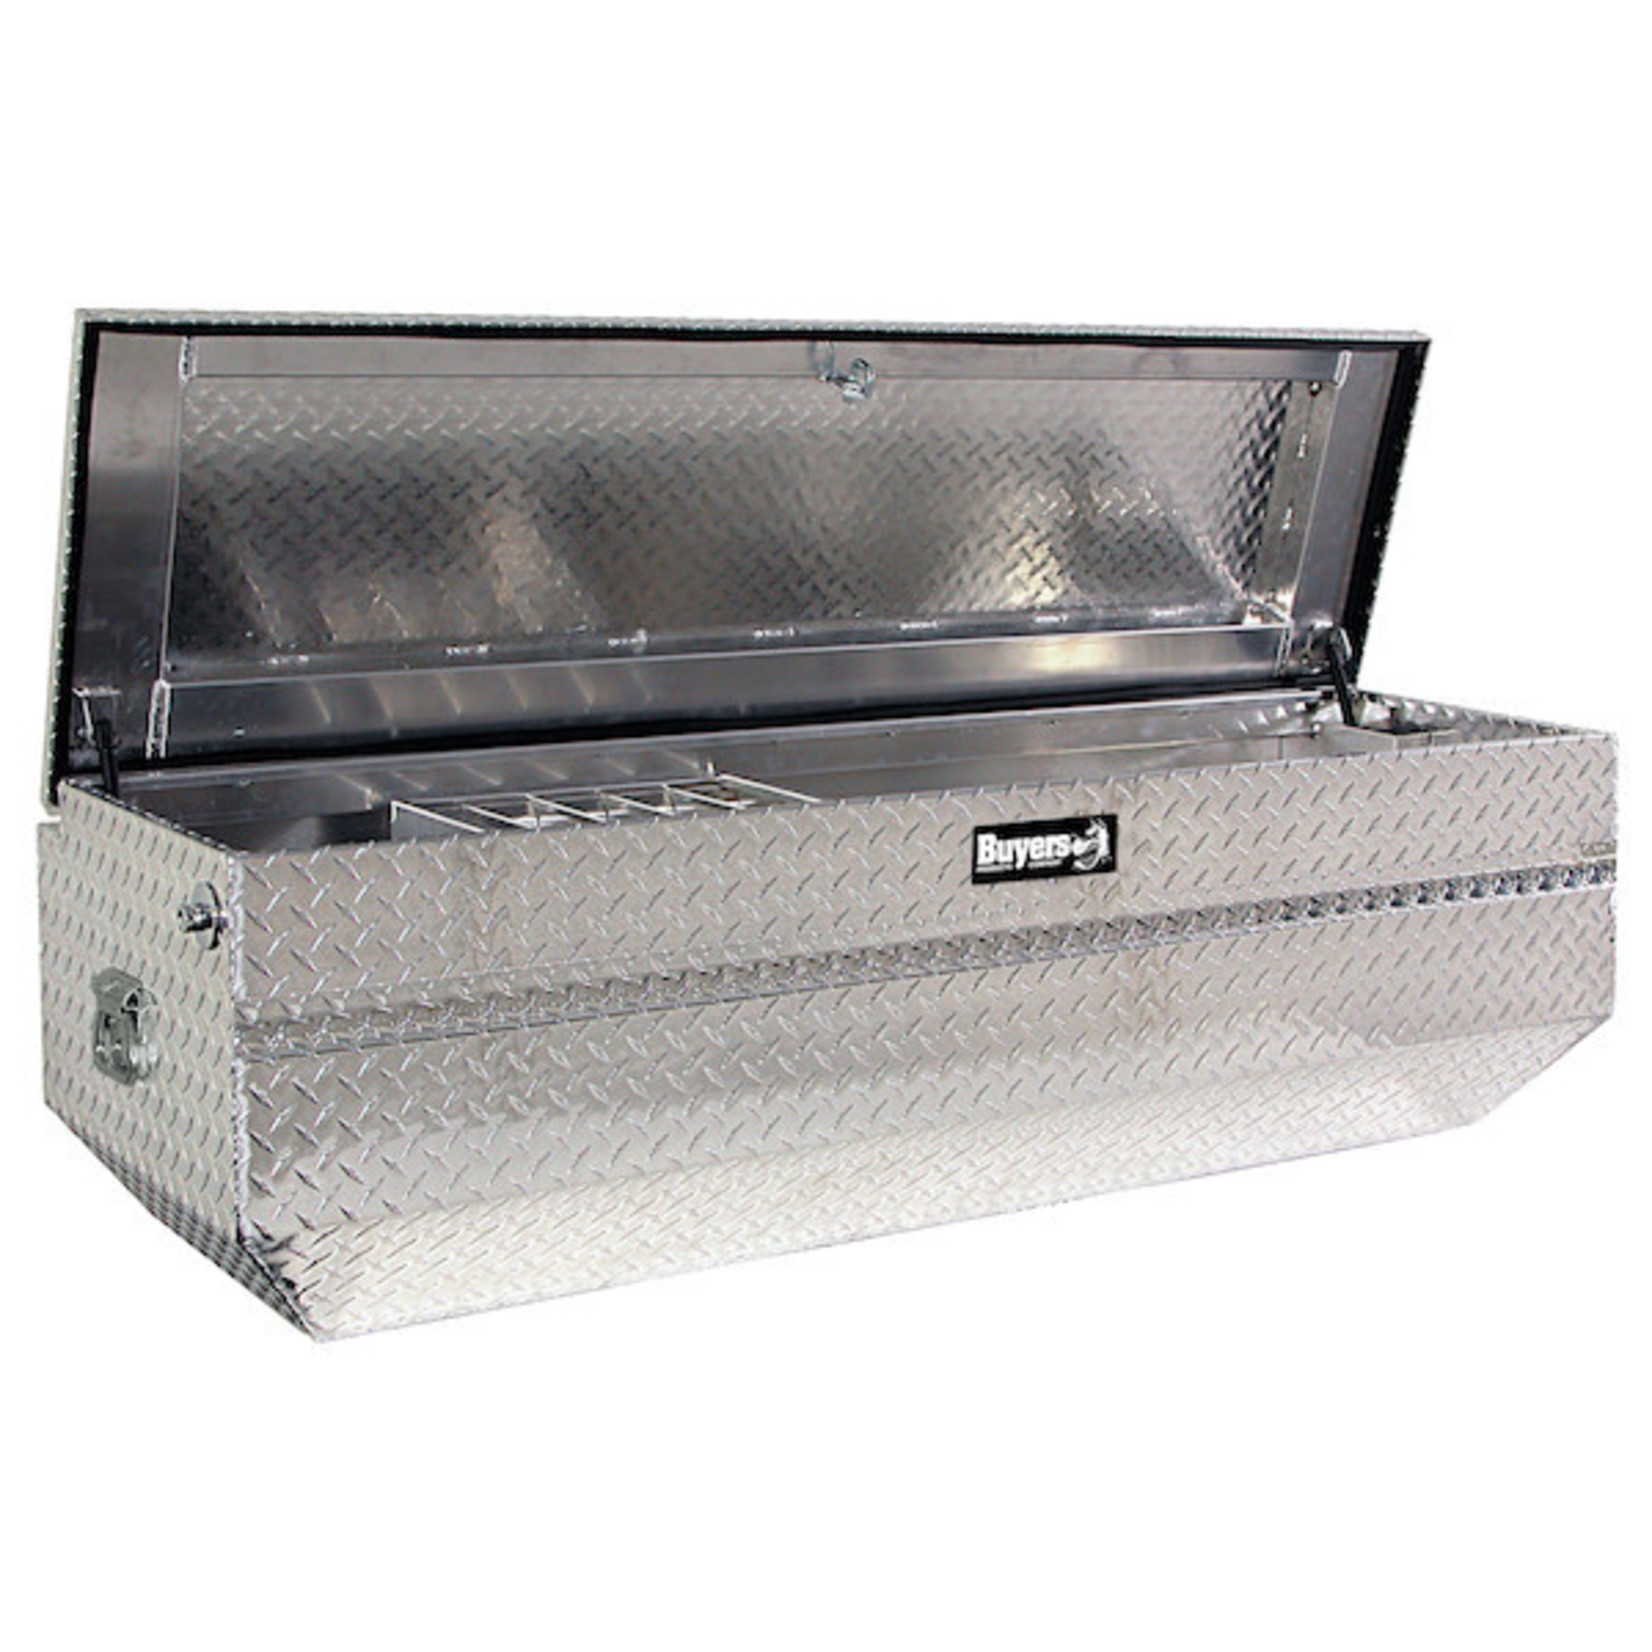 Buyers Products Company Diamond Tread Aluminum All-Purpose Chest with Angled Base Series